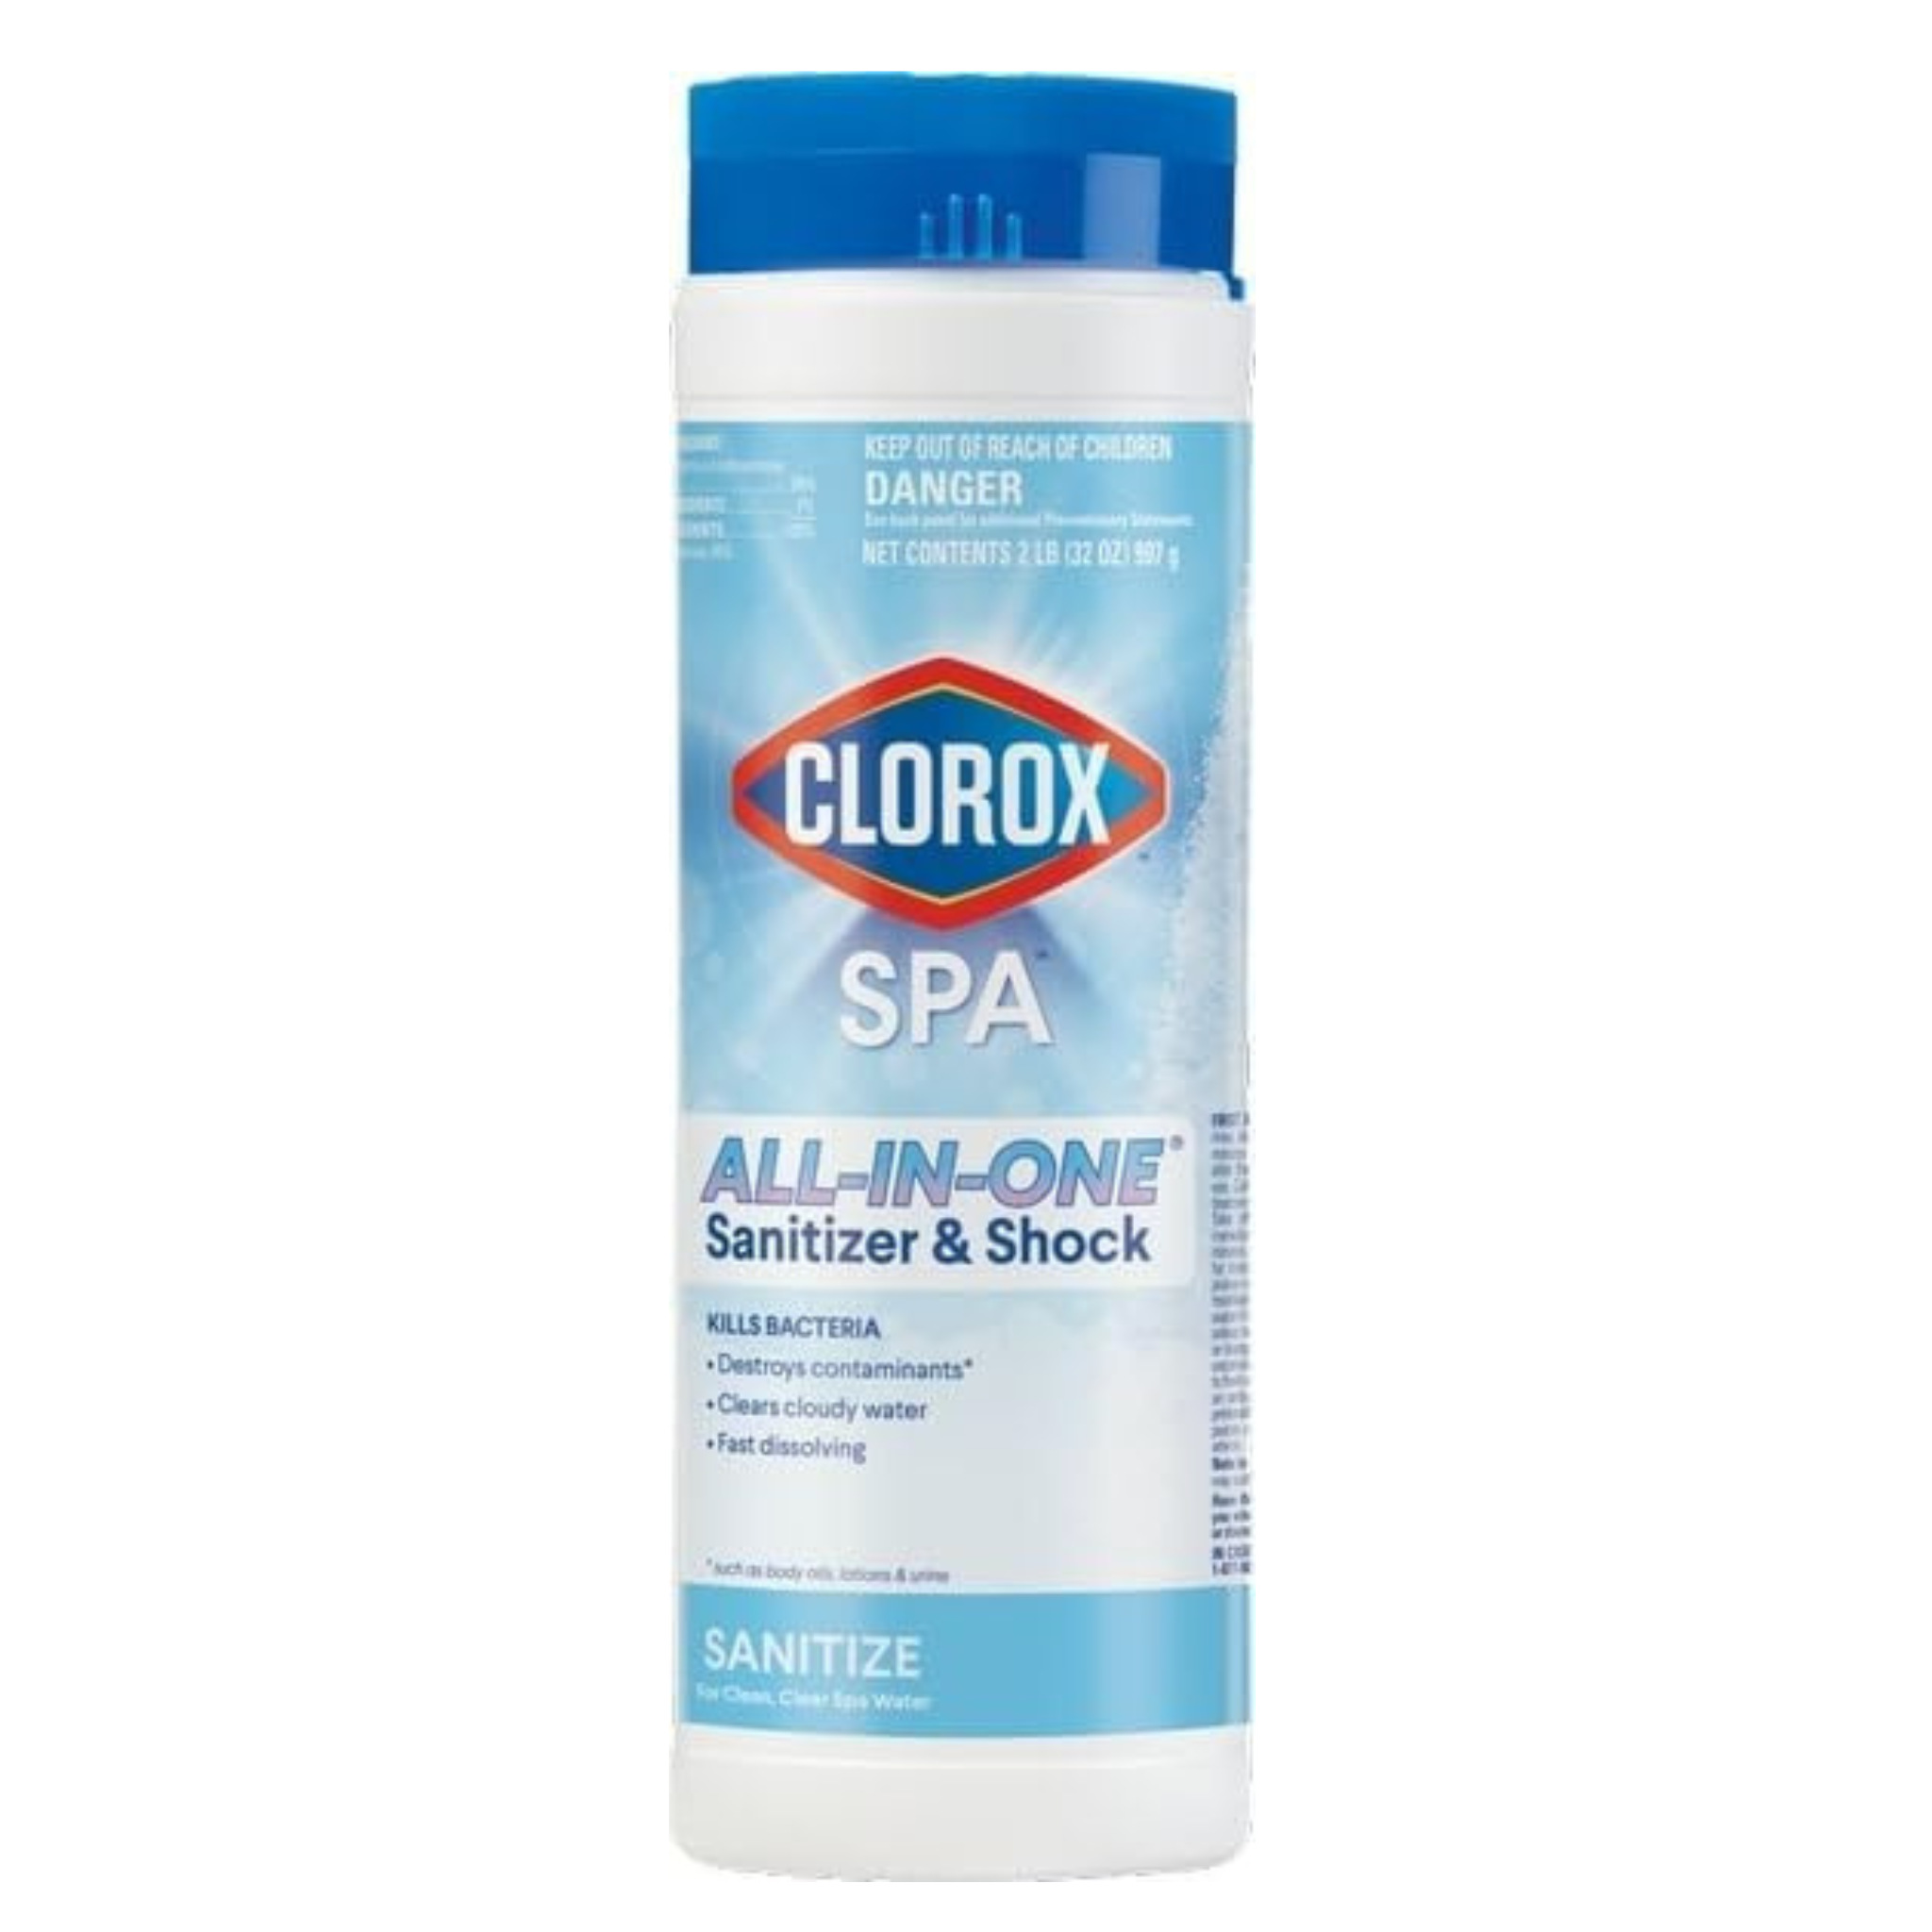 Clorox Pool&Spa Spa Water All-in-One Sanitizer & Shock, Destroys Contaminants, Clears Cloudy Water (2 LB)